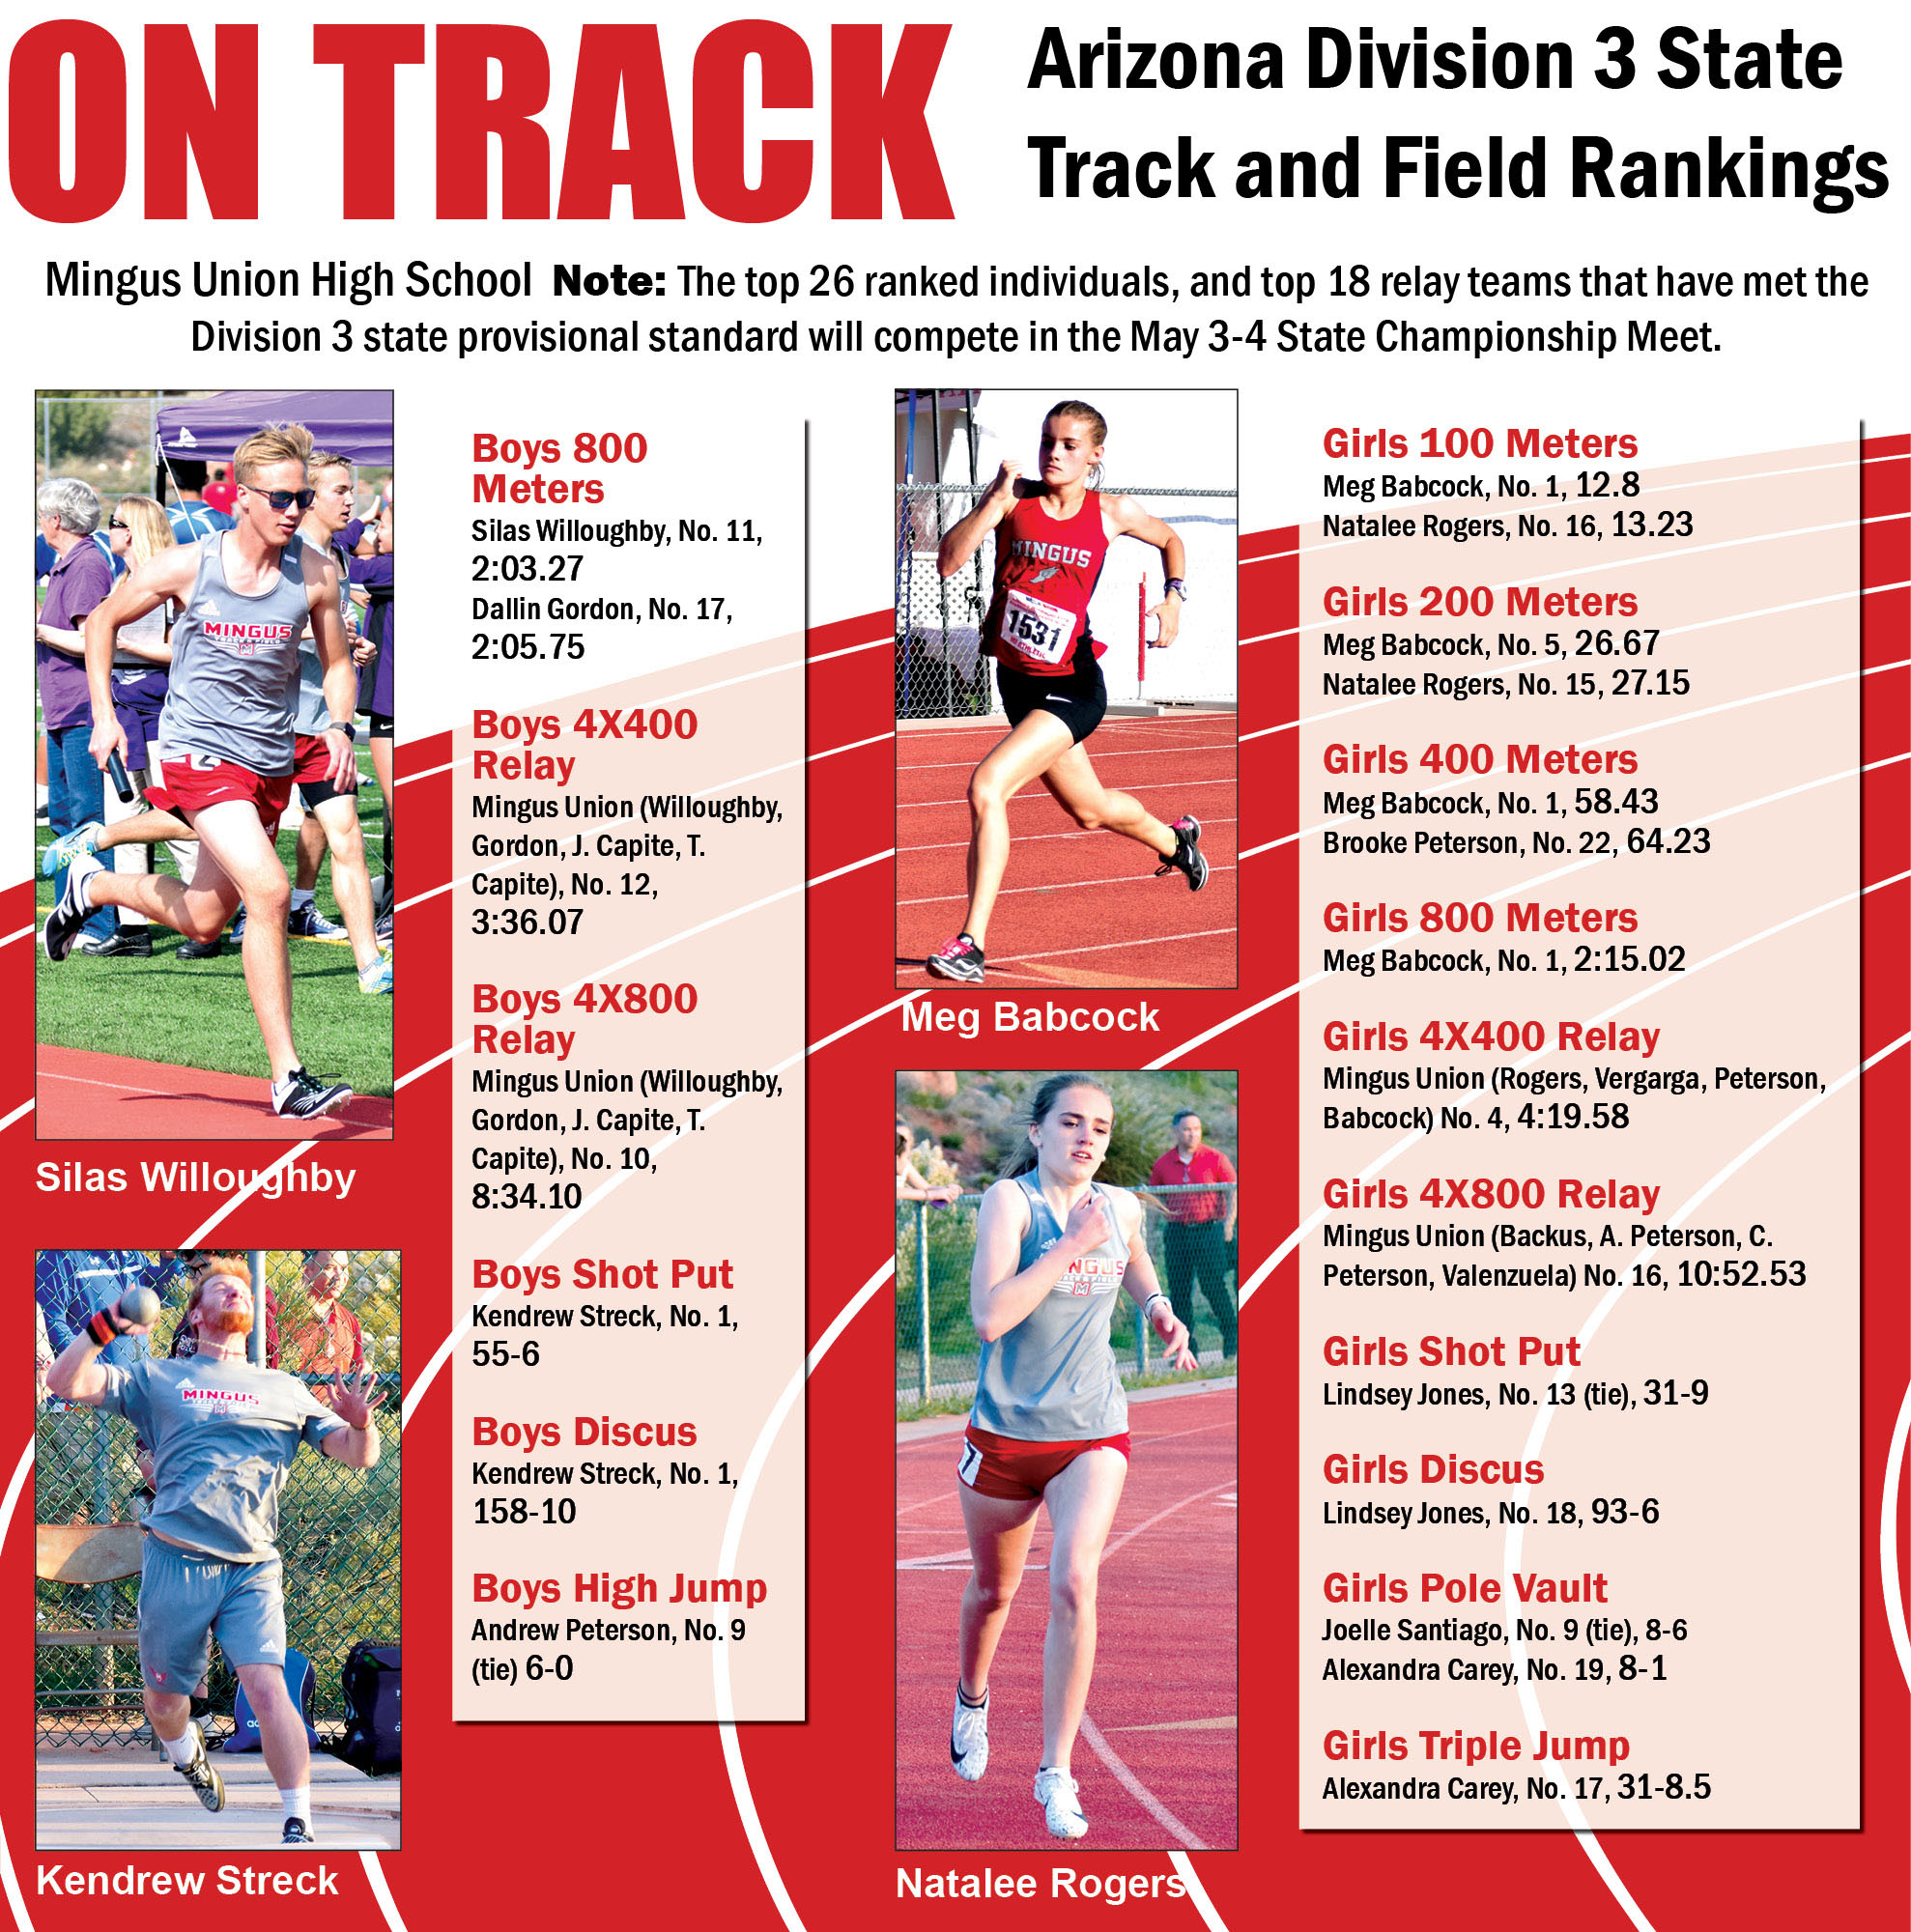 ON TRACK Arizona Division 3 State Track and Field Rankings The Verde